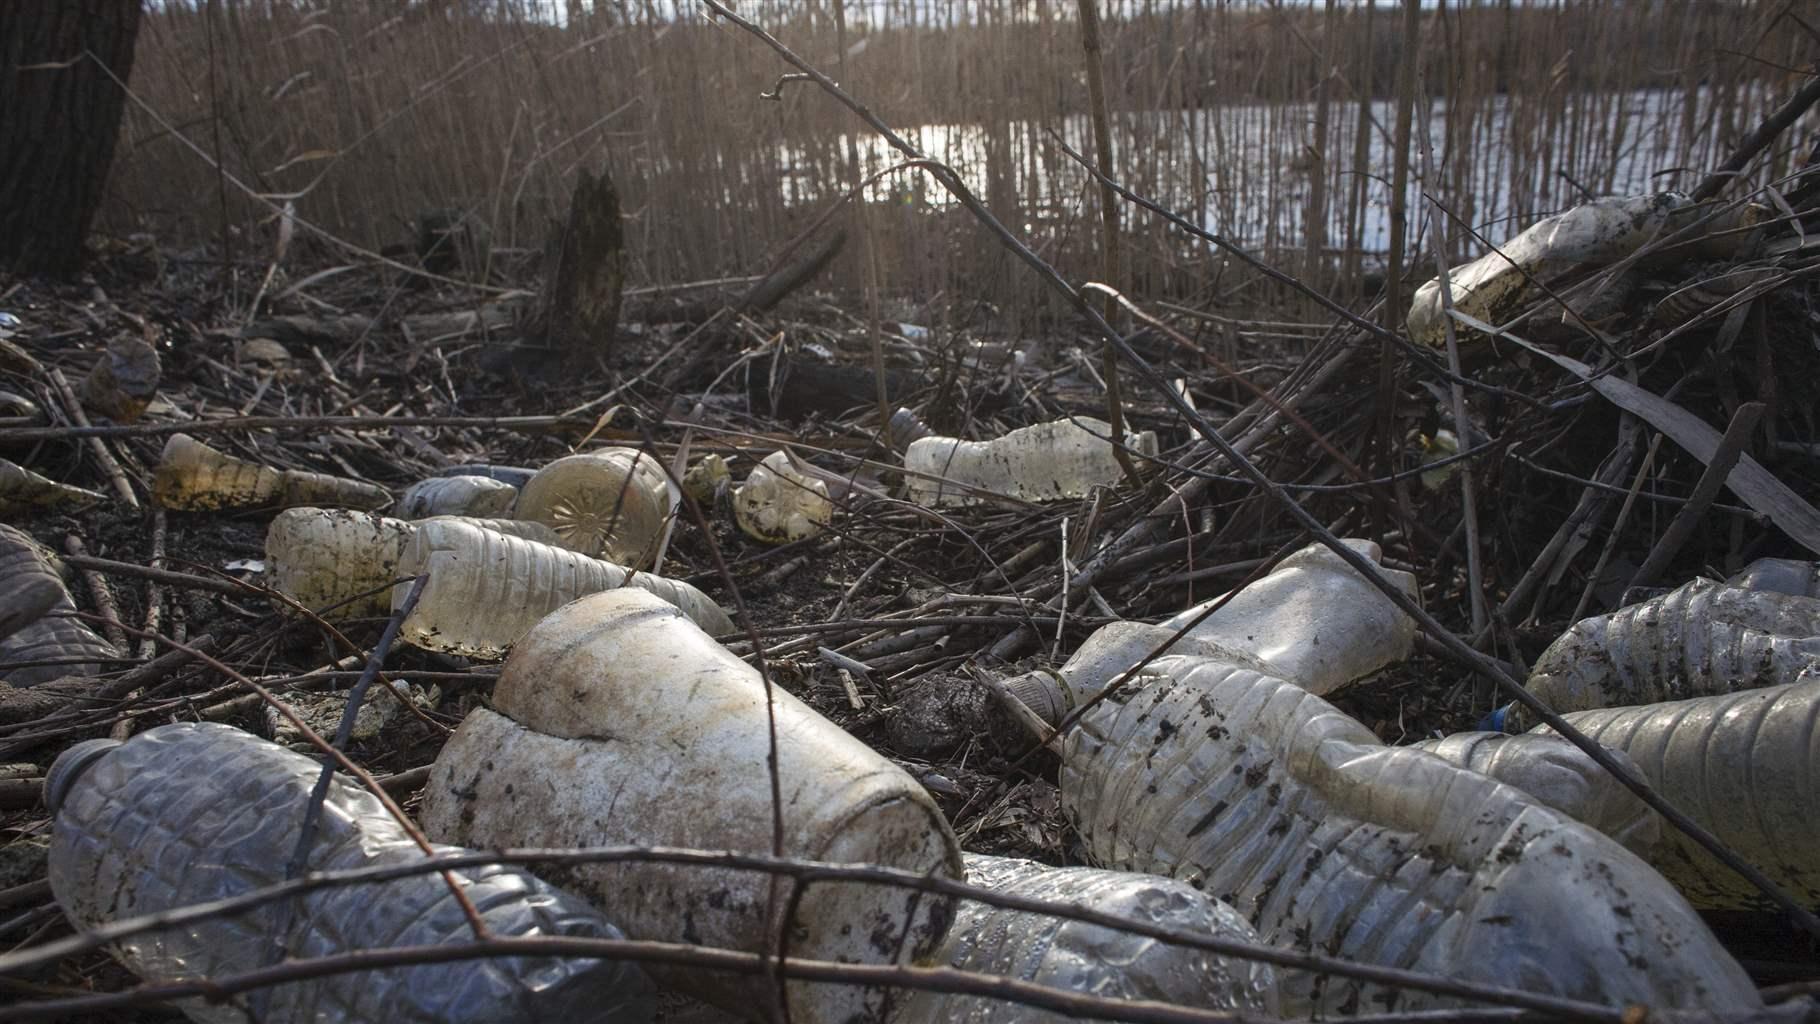 Plastic bottles and other refuse lay washed up on the banks of a tidal inlet off the Delaware River at Pennypack On The Delaware Park in Philadelphia, PA, February 8, 2020.